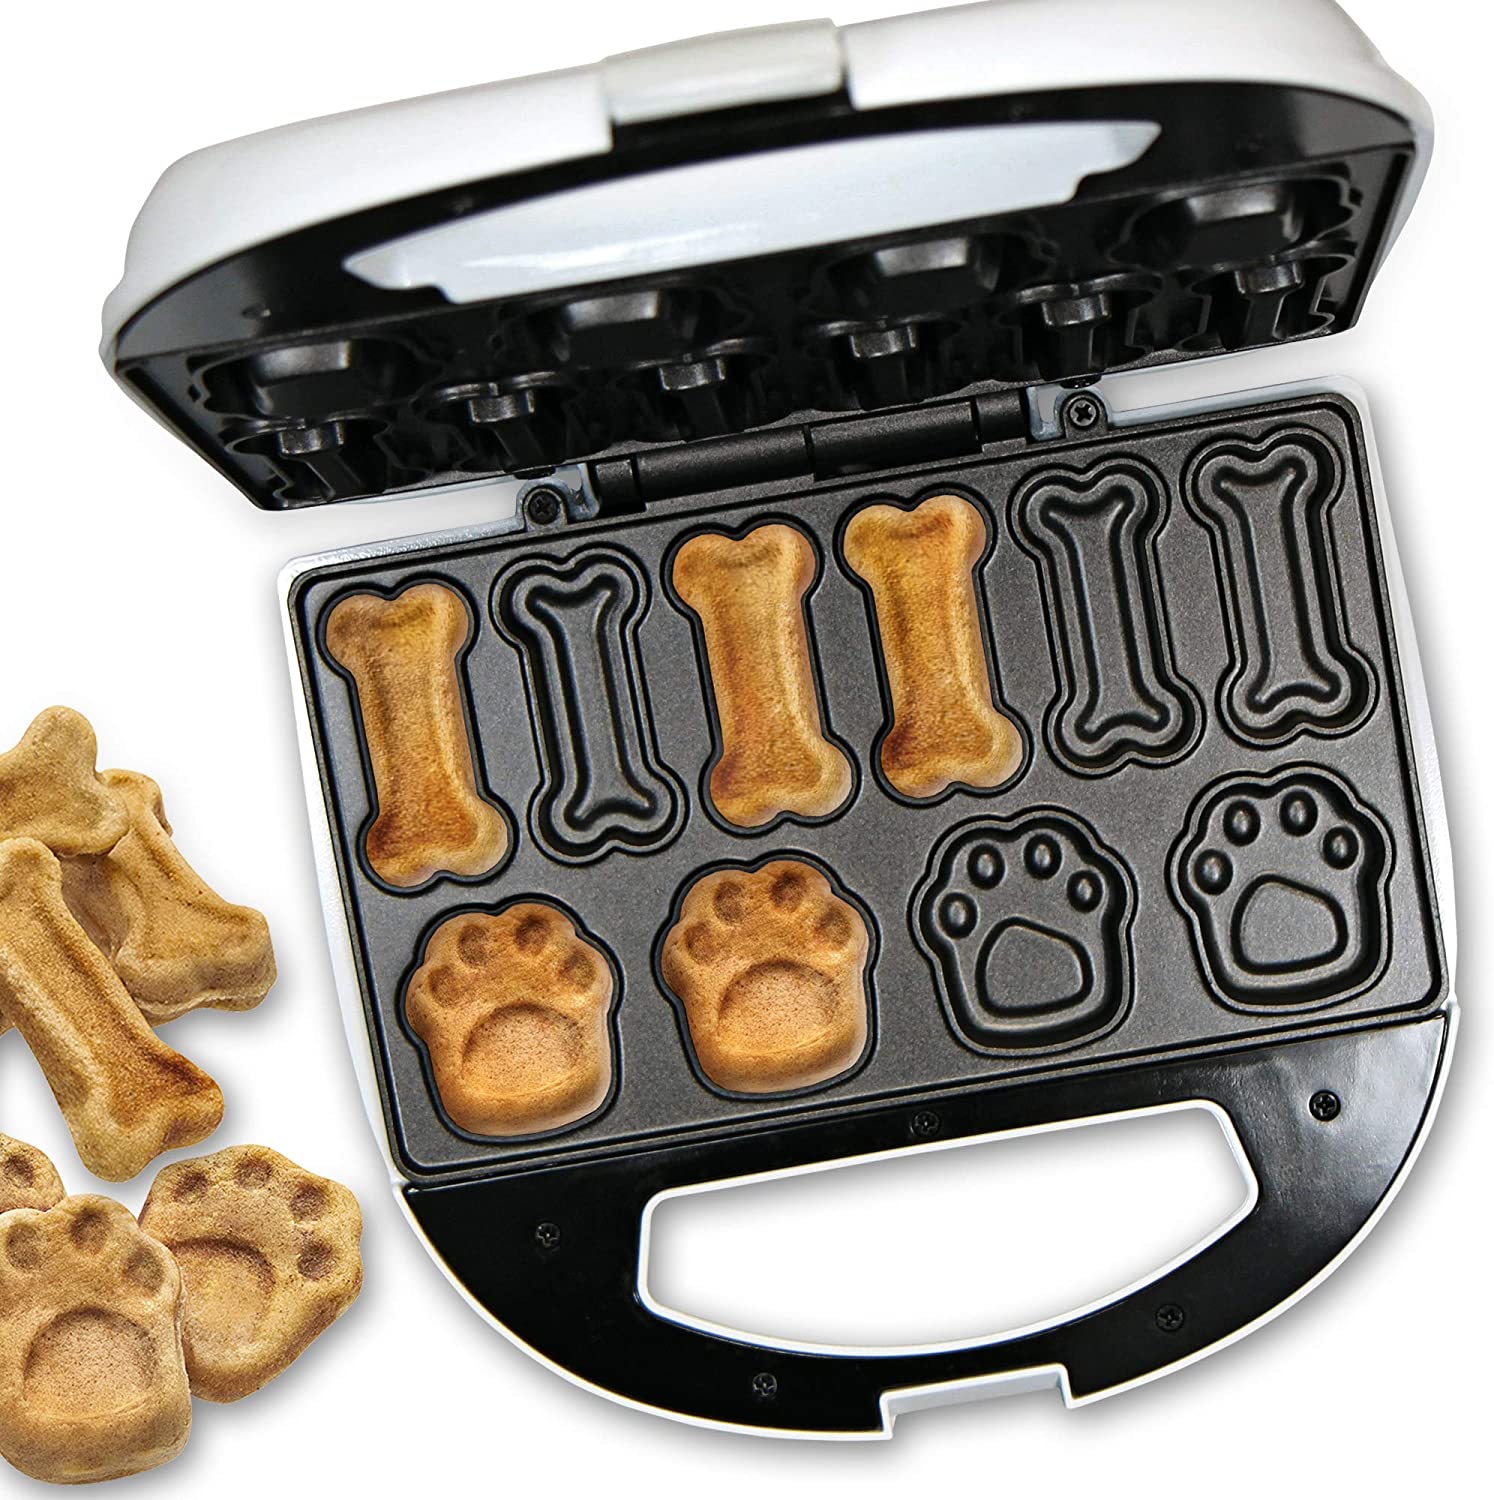 Clatronic DCM 3683 Dog Cookie Maker with Recipe Suggestions-Baking Surfaces